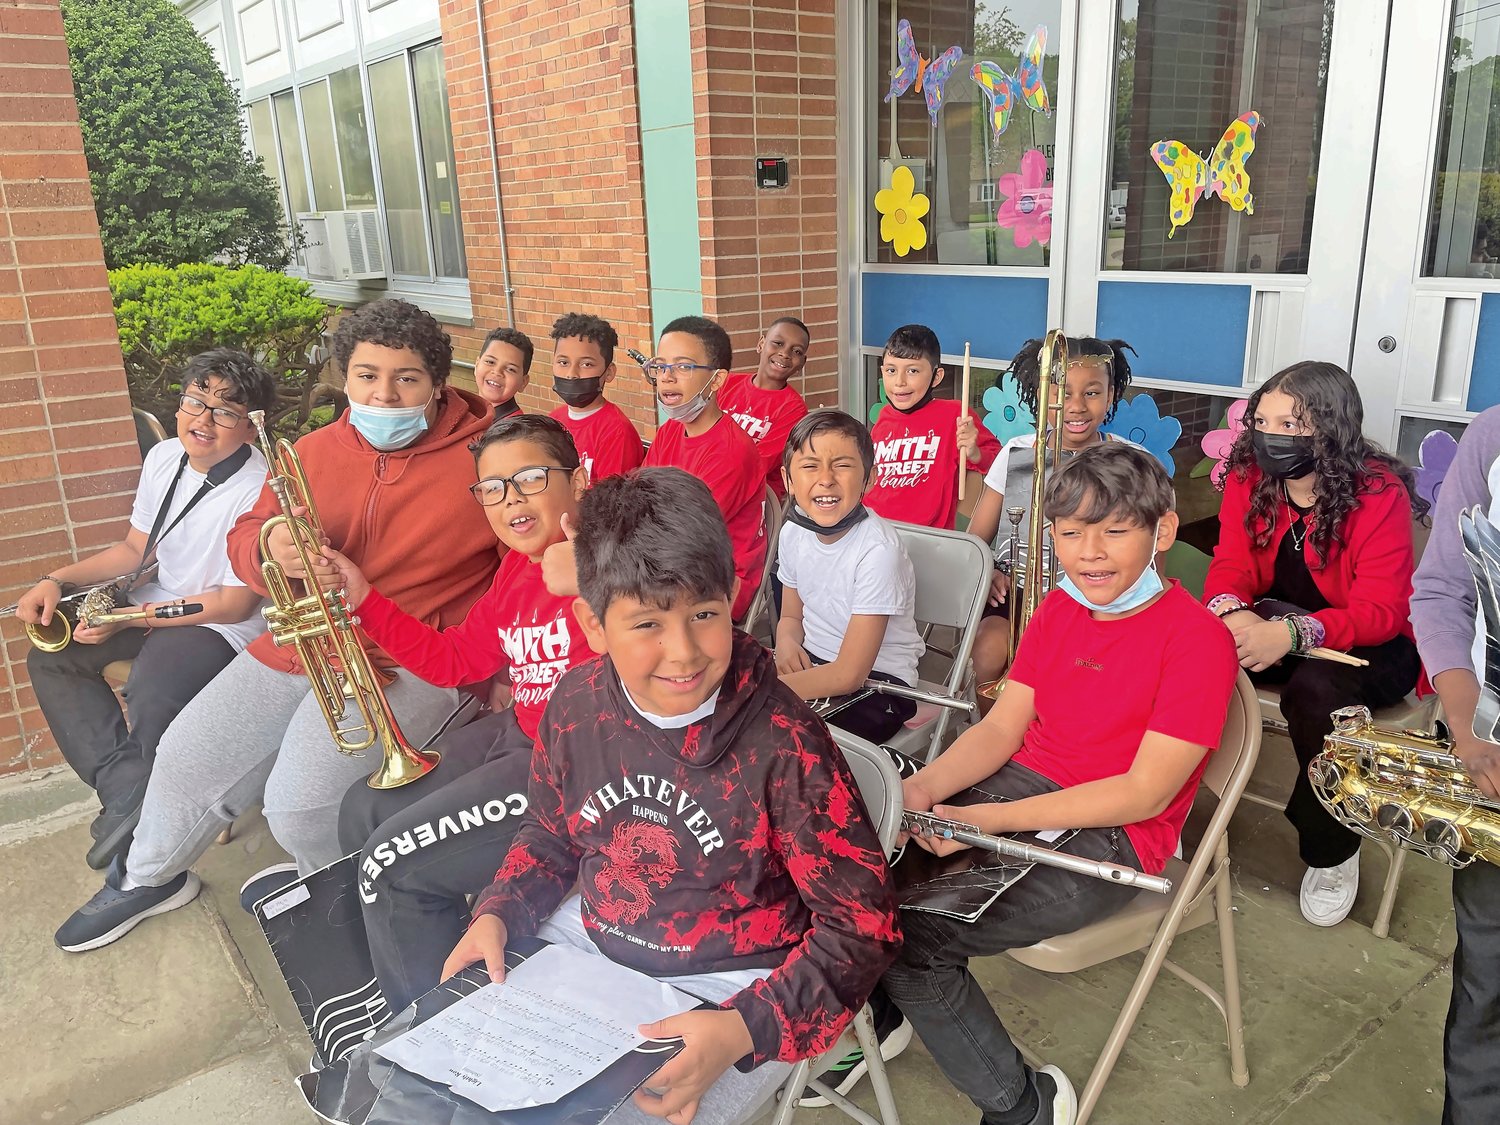 The Smith Street Band Scholars delighted families and friends at last week’s second annual Hootenanny.